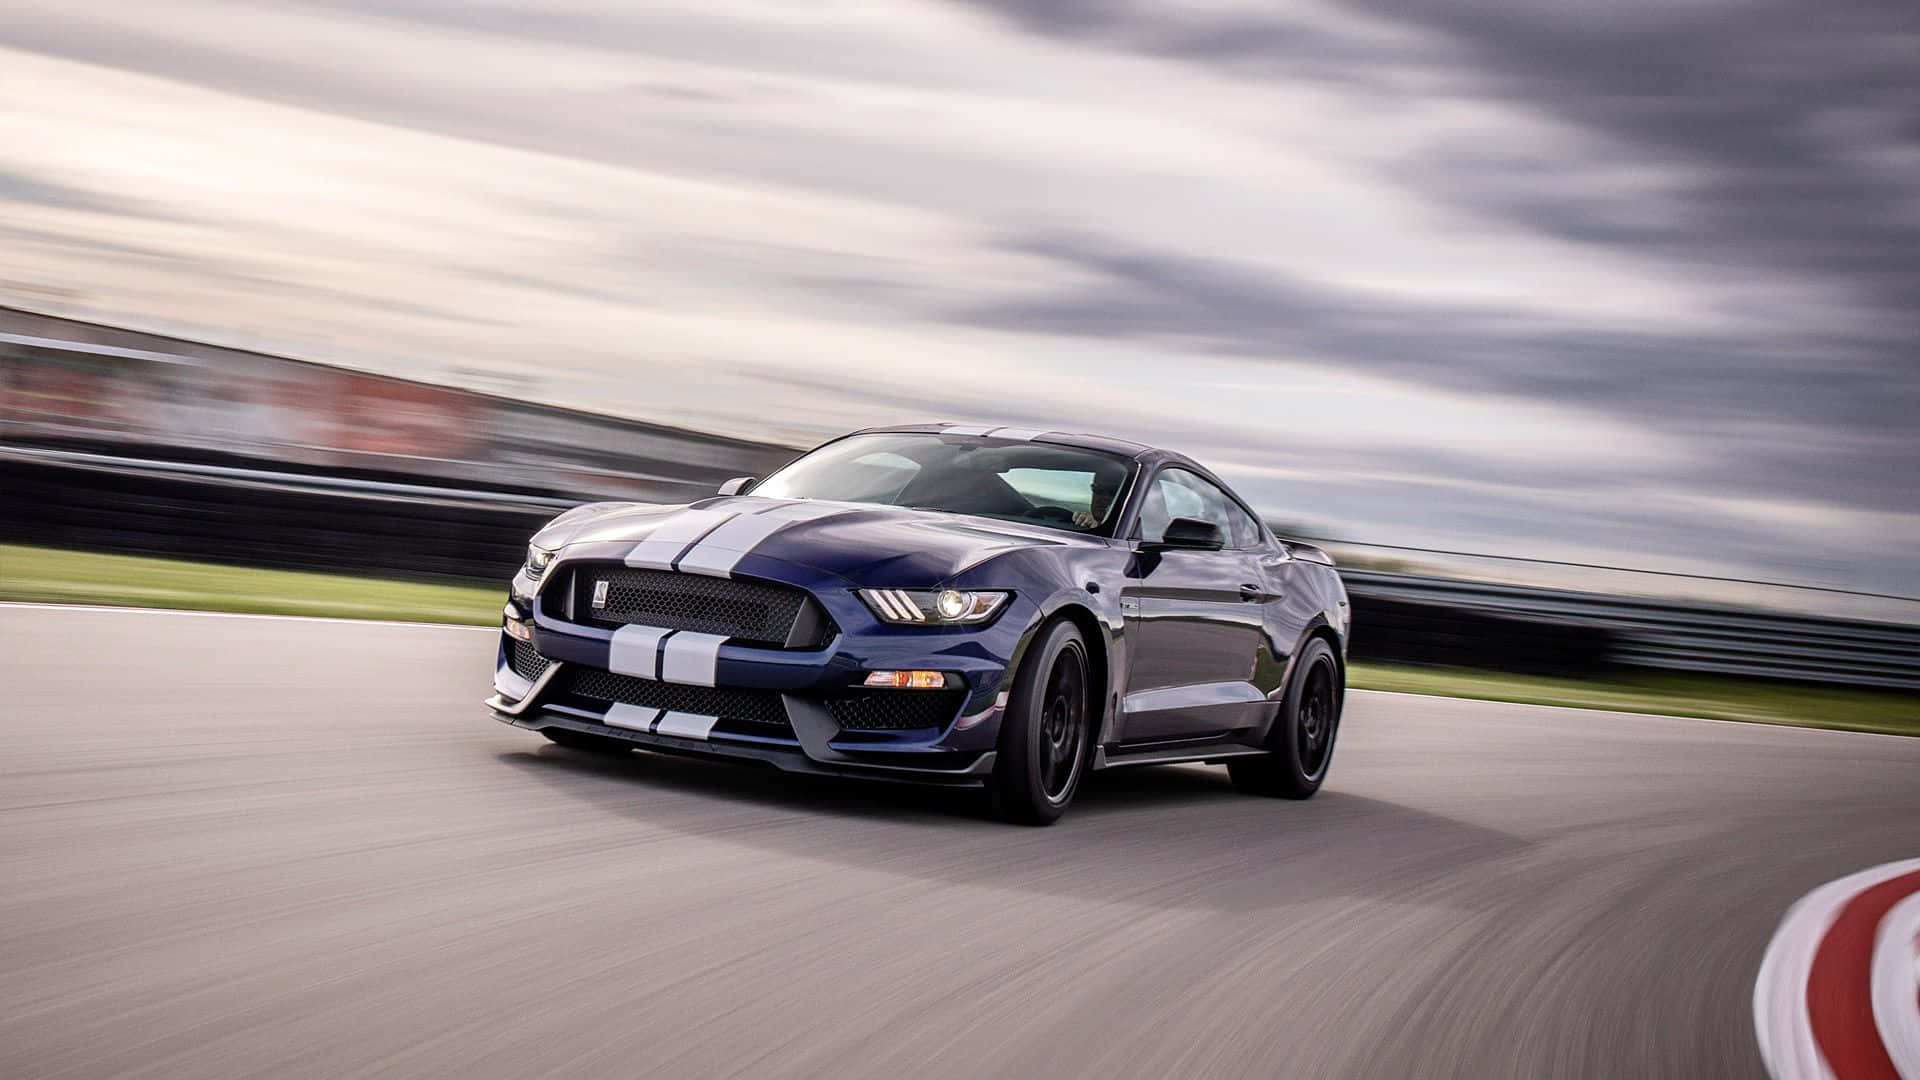 Ford Mustang Shelby GT350 - A Powerful American Icon Wallpaper